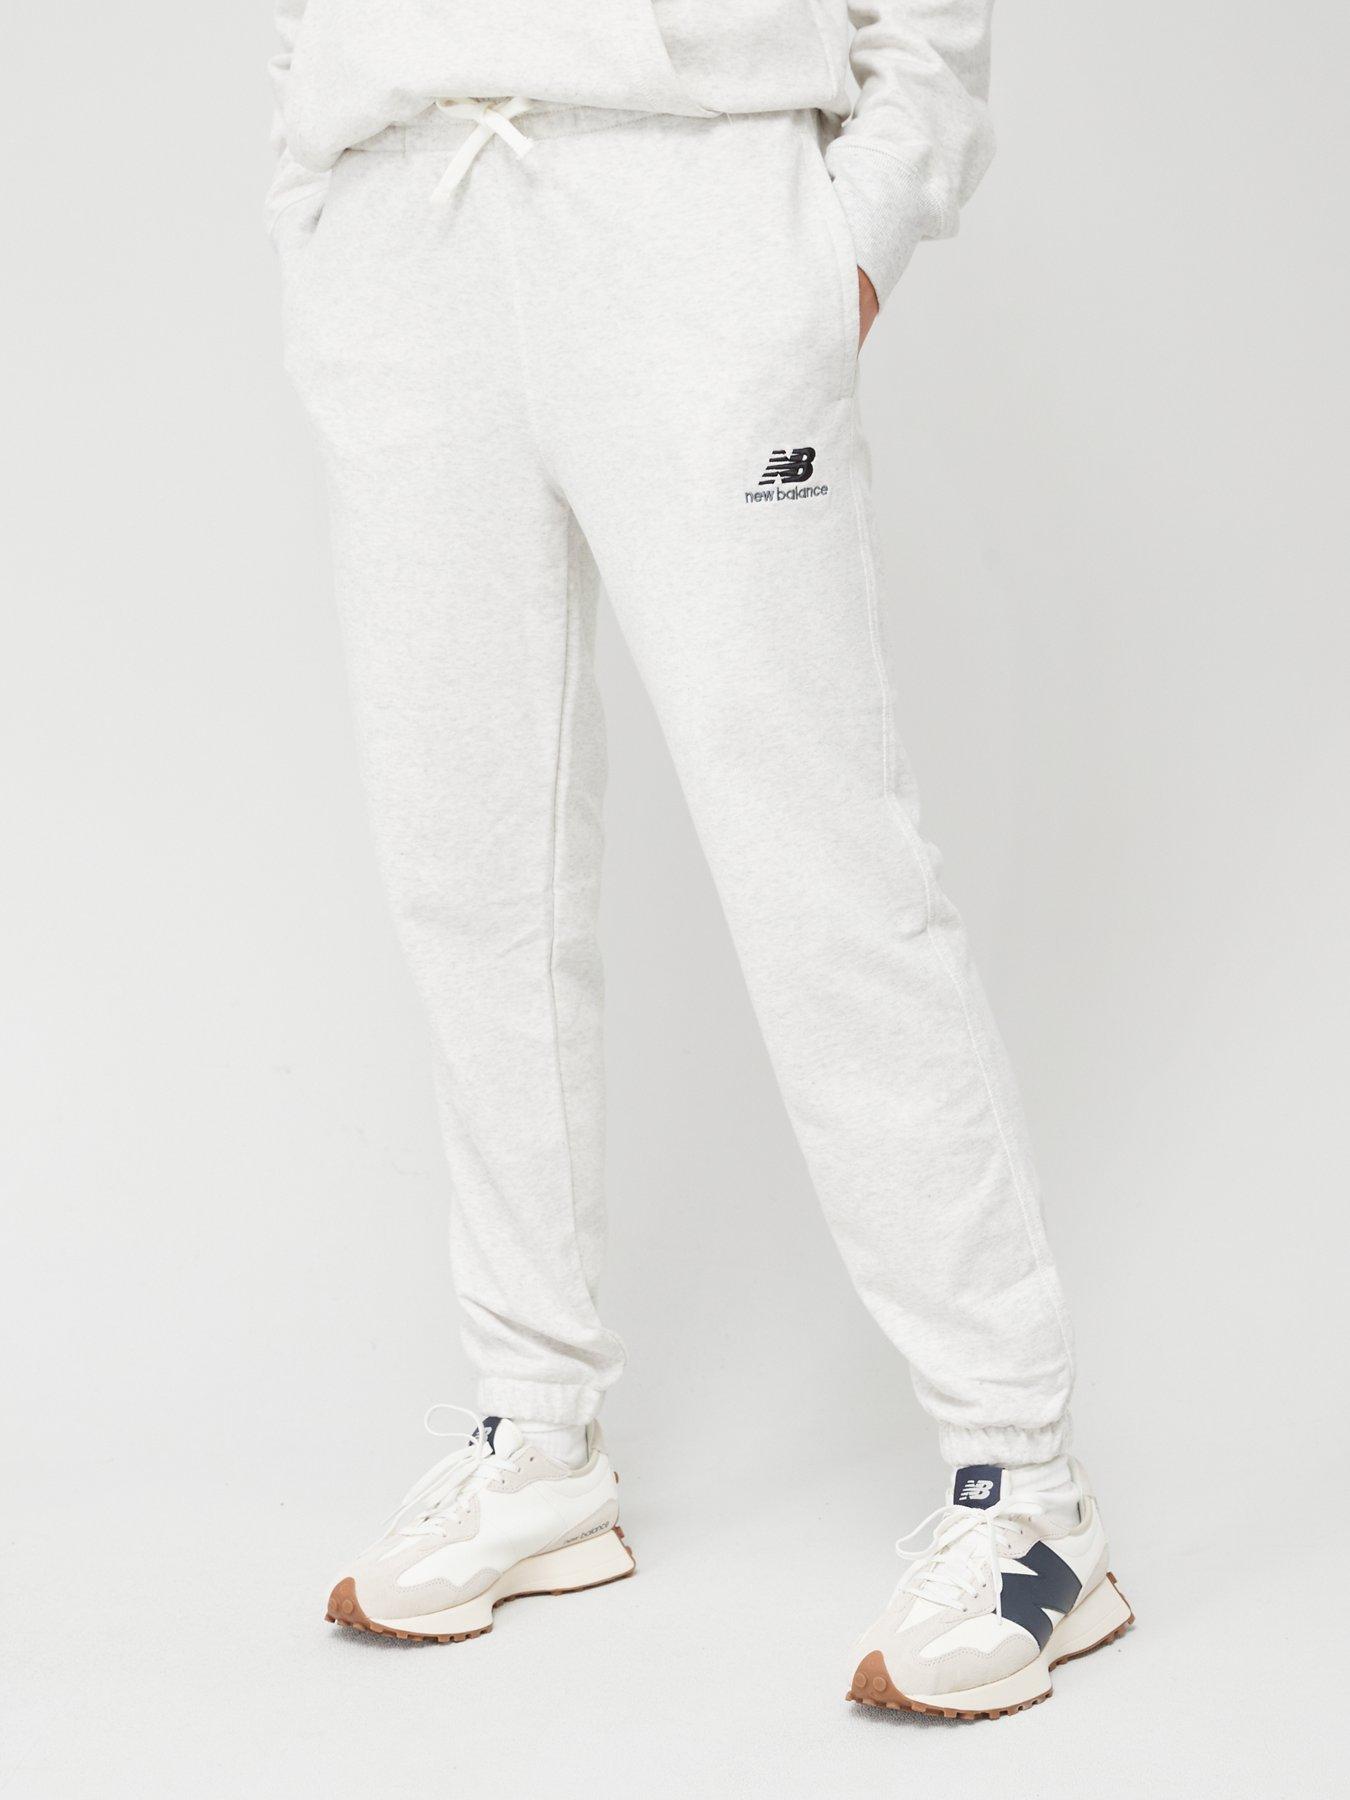 New Balance Uni-ssentials French Terry Sweatpants - Off White